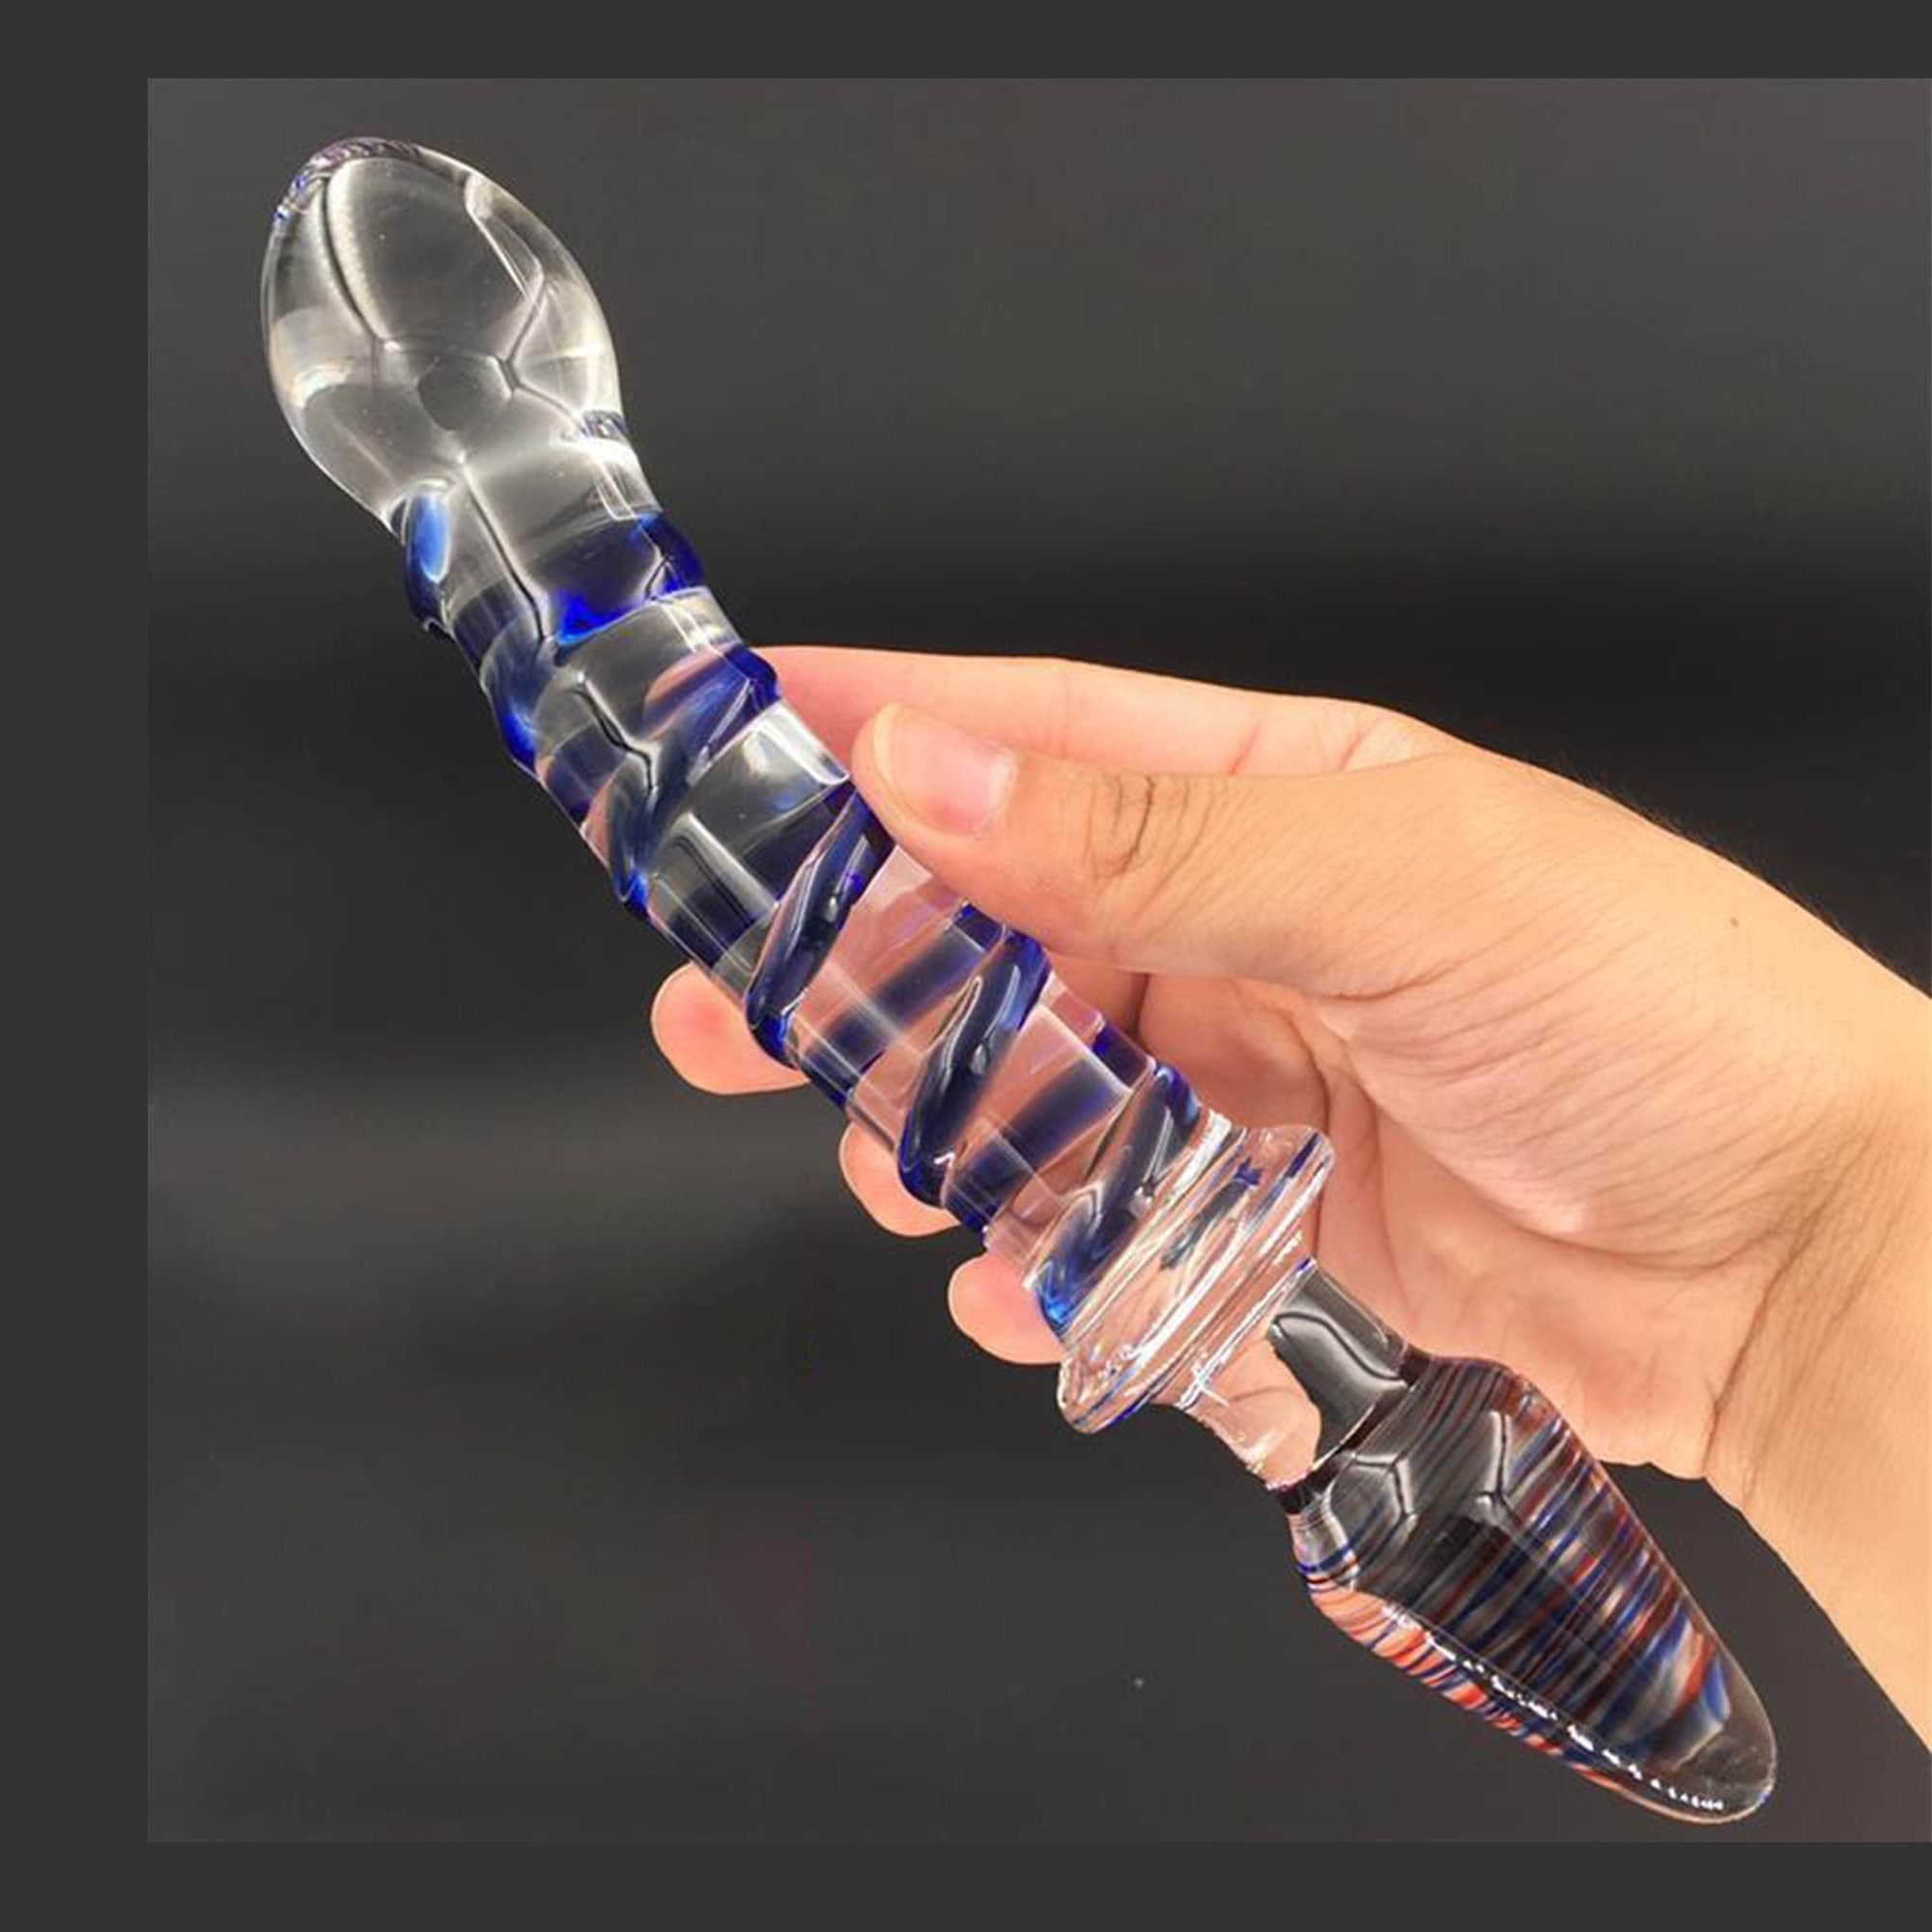 Double Ended Glass Dildo Glass Crystal Wand Dildo With